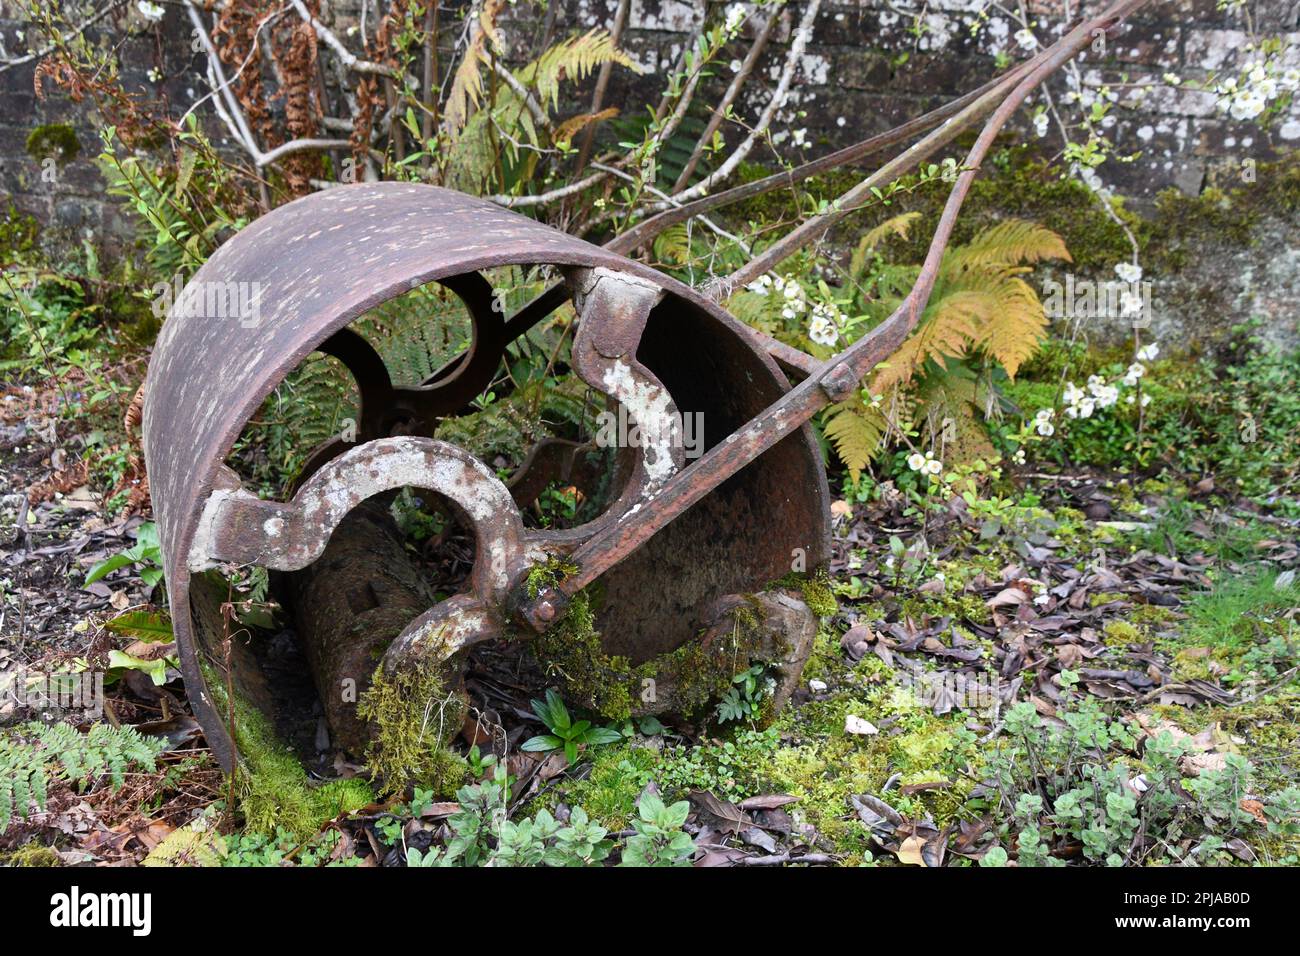 Old cast iron garden roller becoming covered in moss and ferns as it lay neglected in the corner of the Lost Gardens at Heligan near Mevagissey in Cor Stock Photo